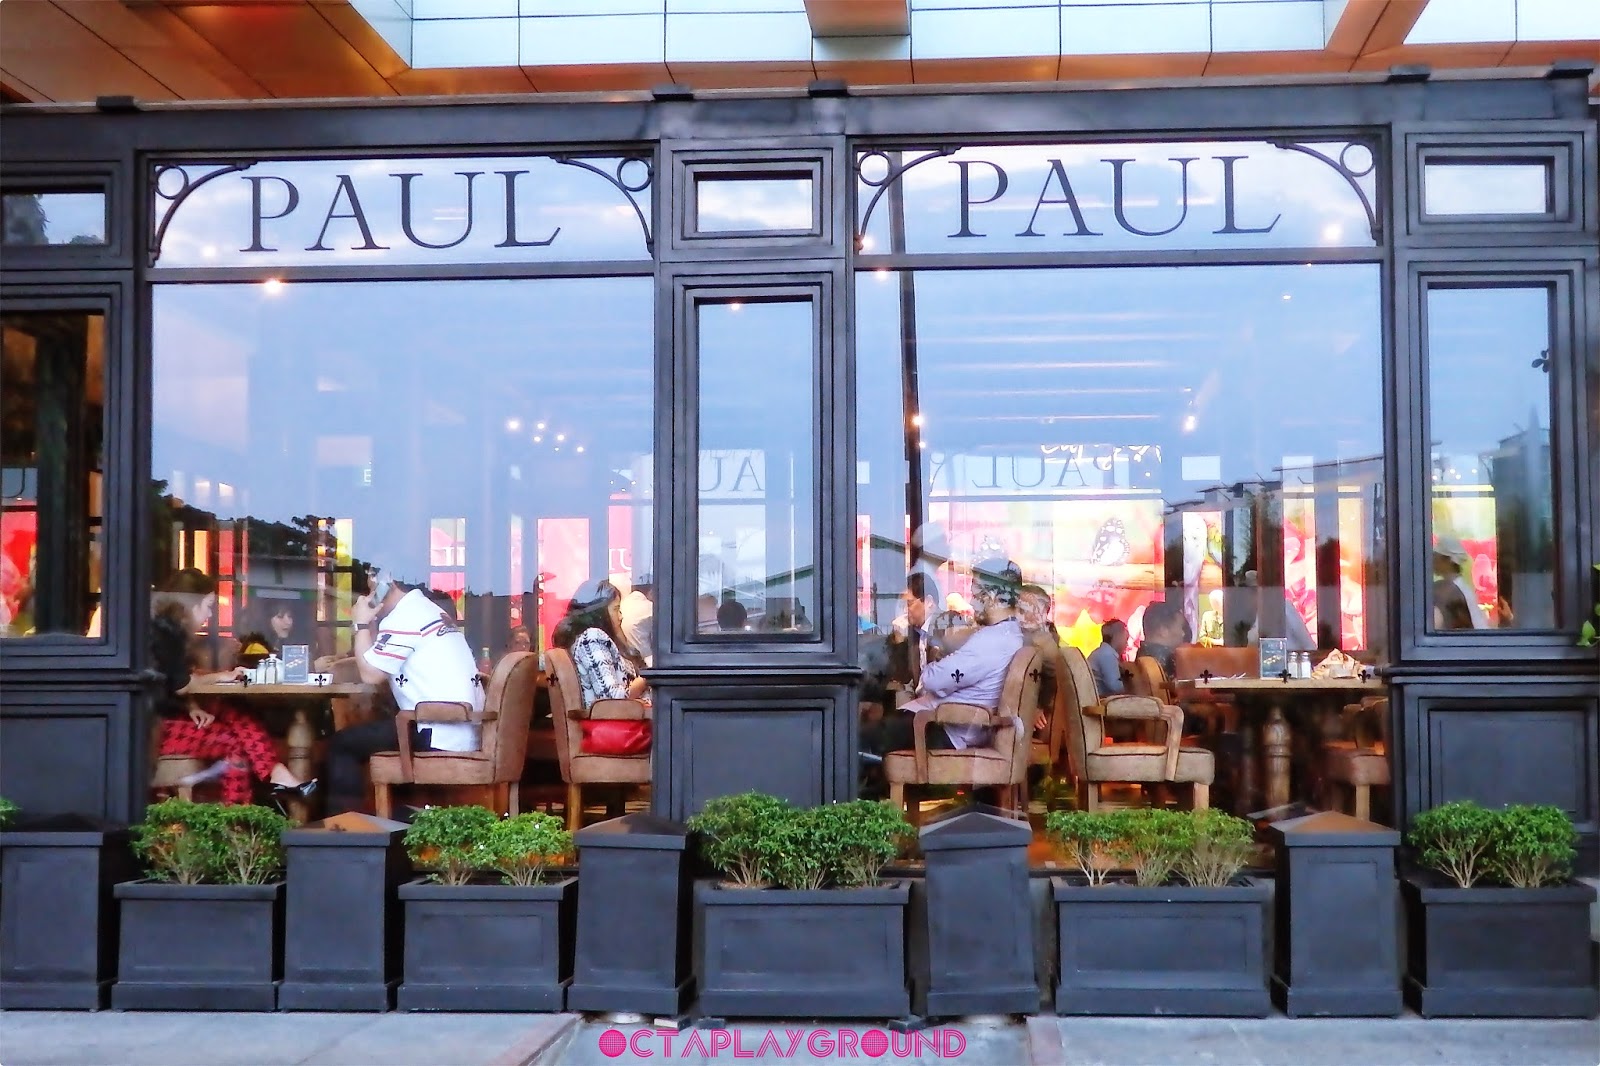 Paul Bakery and Patisserie Indonesia ~ Octa's Playground